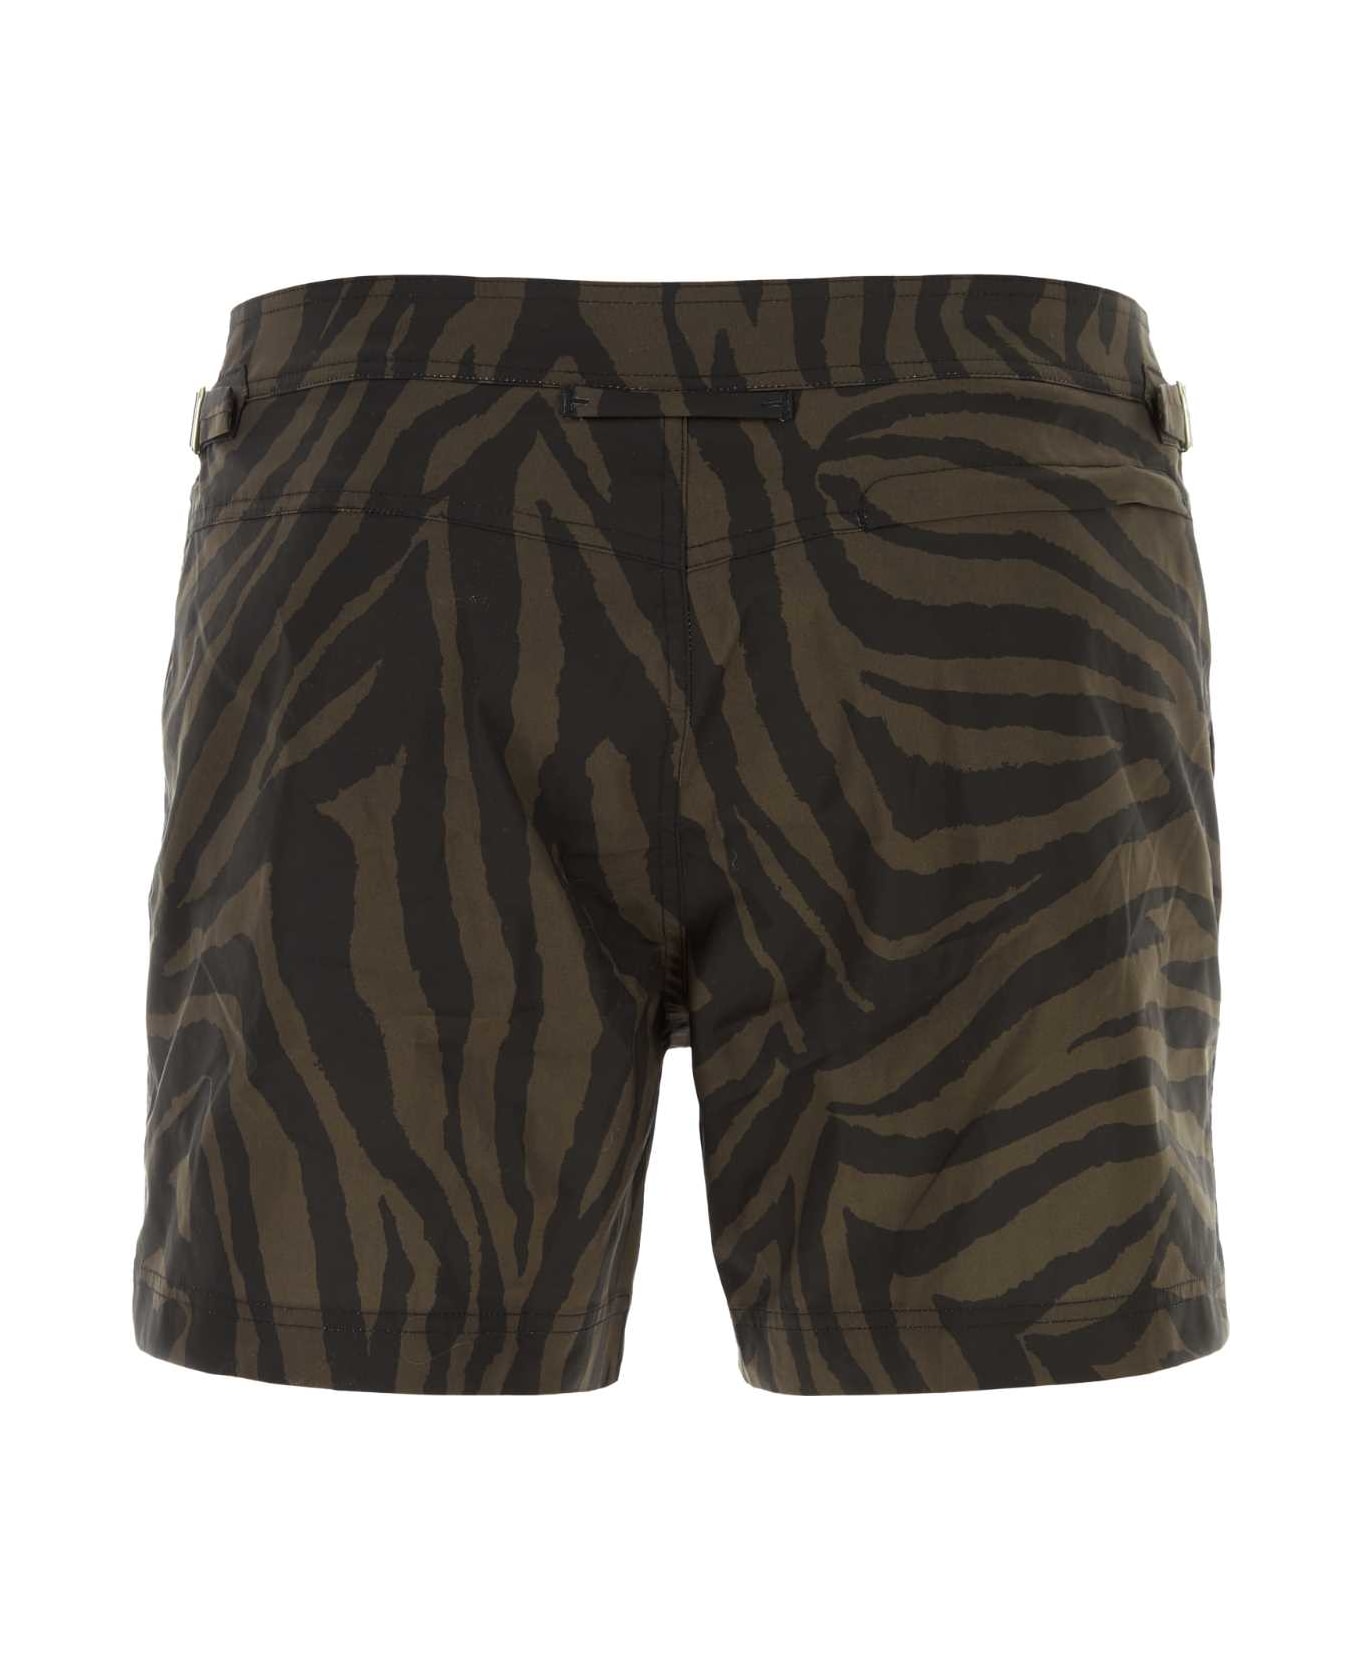 Tom Ford Printed Polyester Swimming Shorts - BROWN